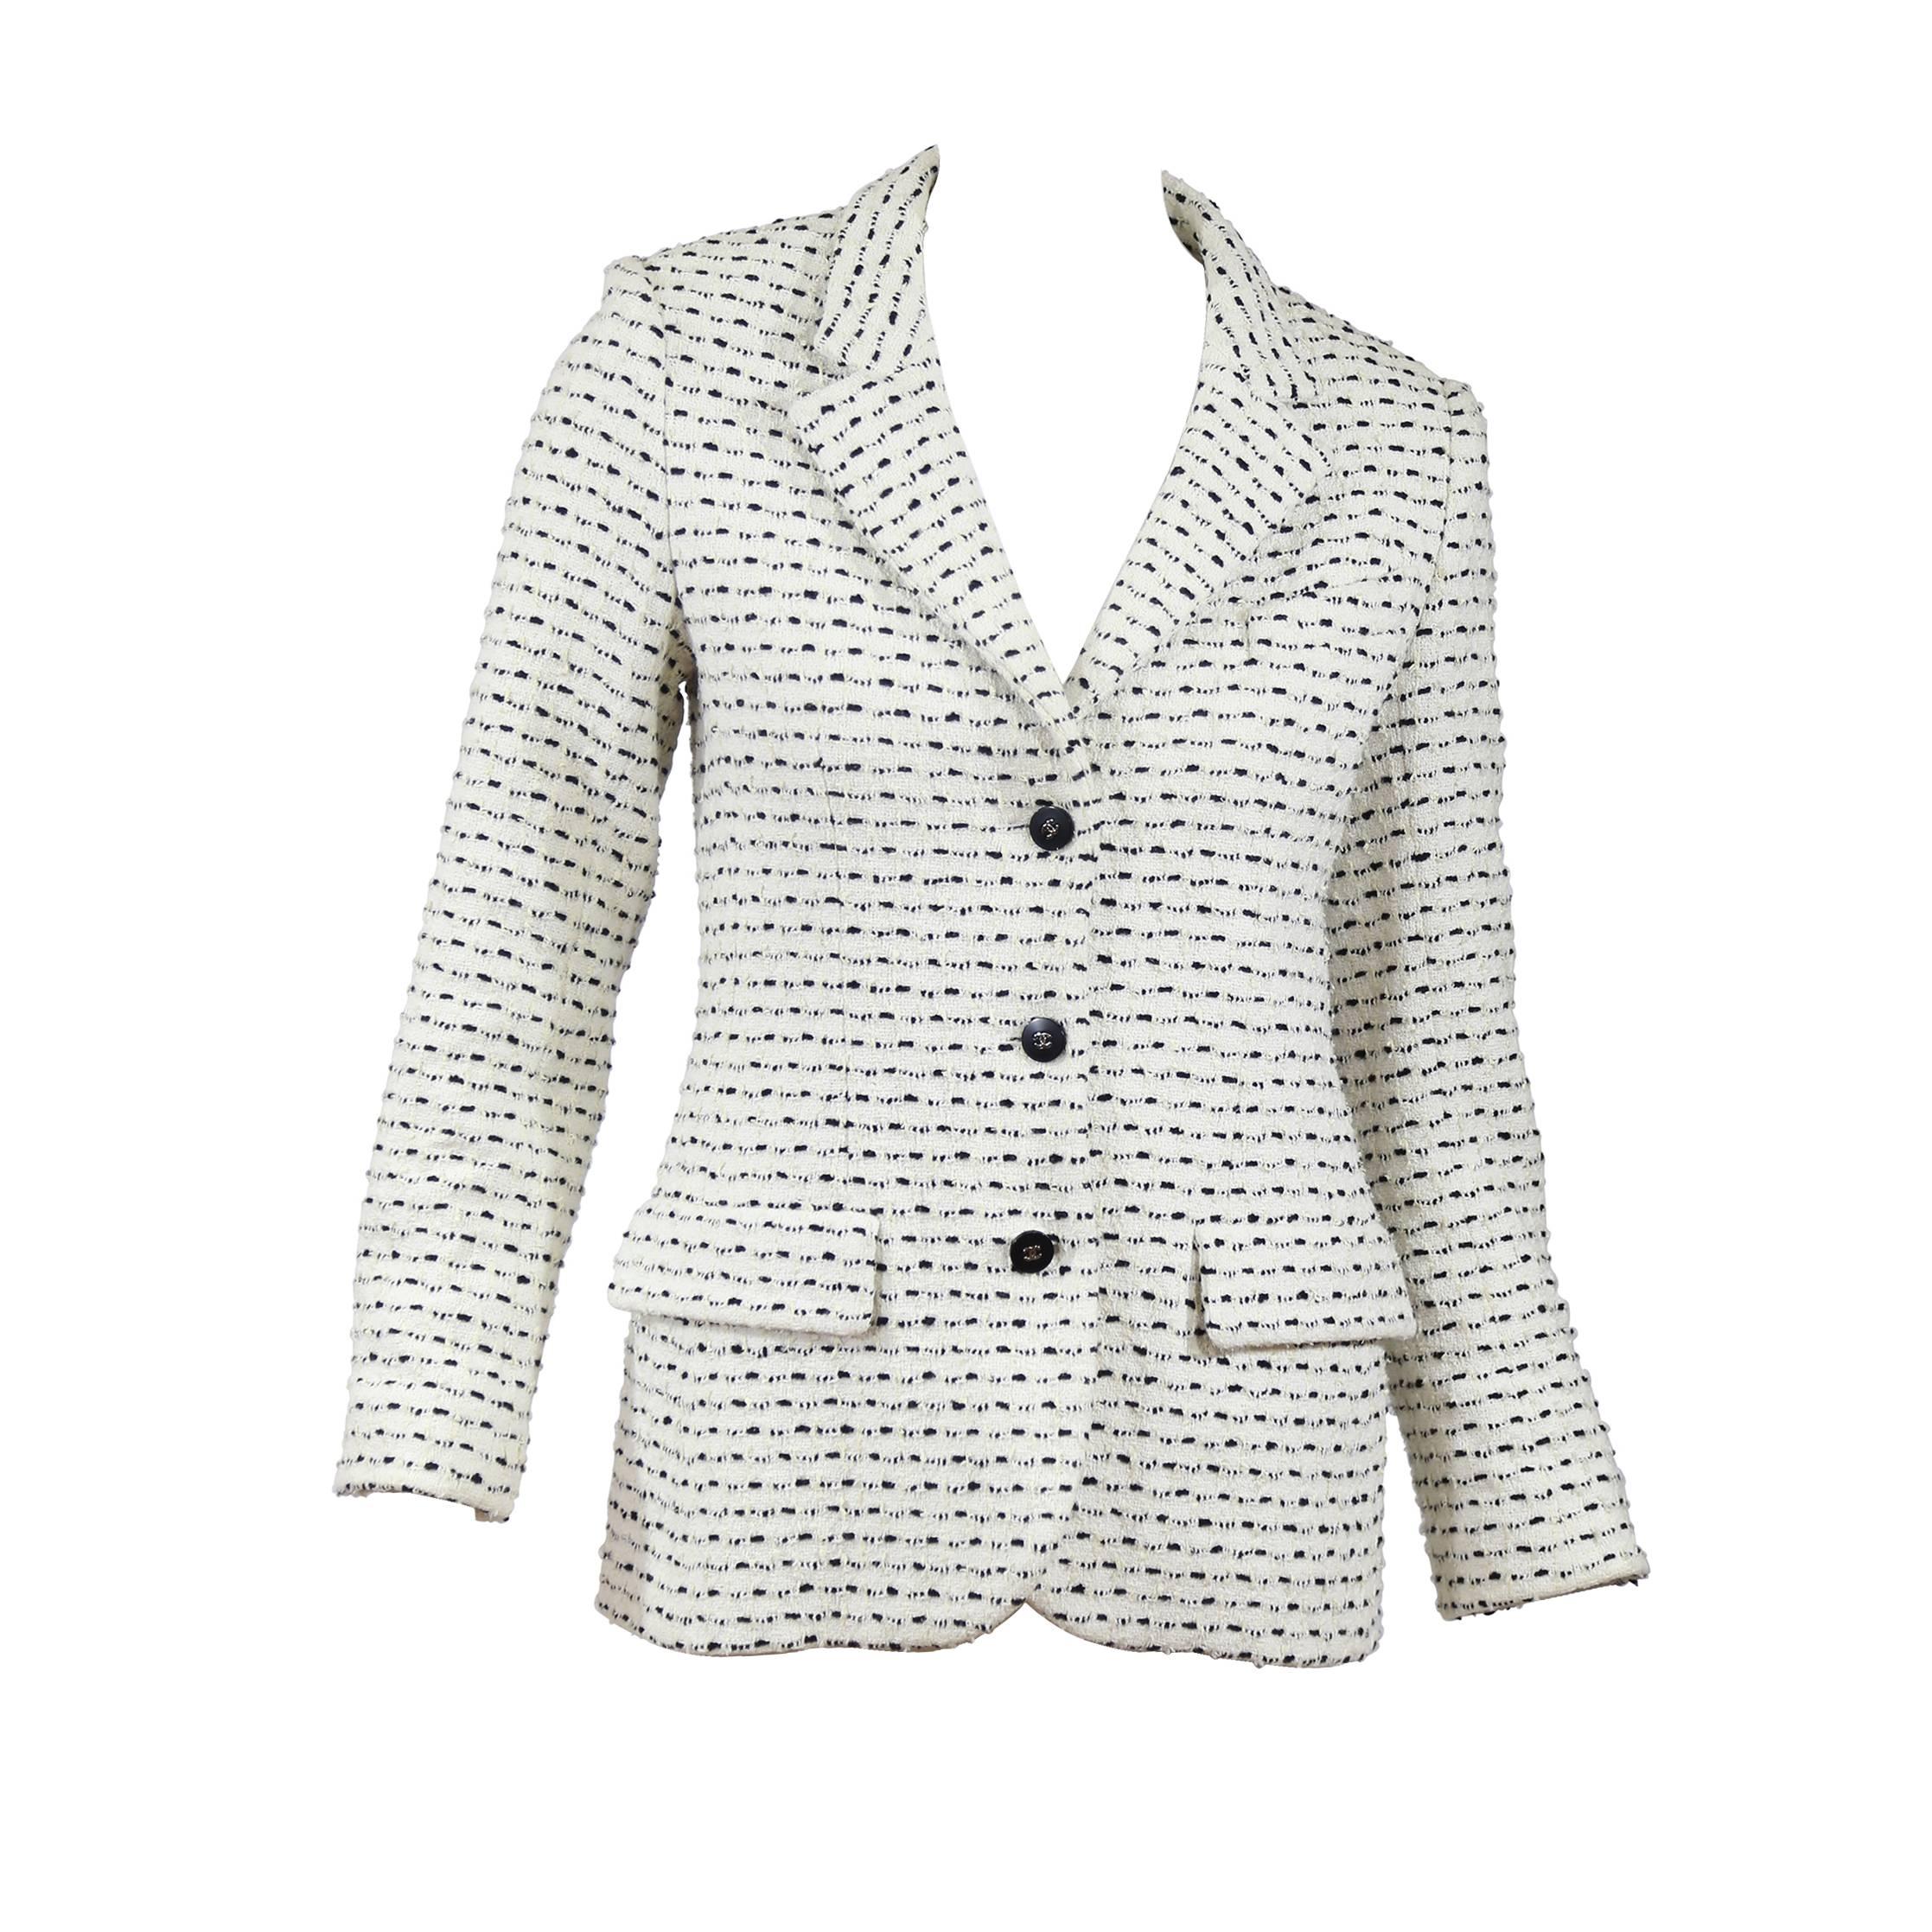 Chanel Black and White Tweed Cotton Blend Jacket